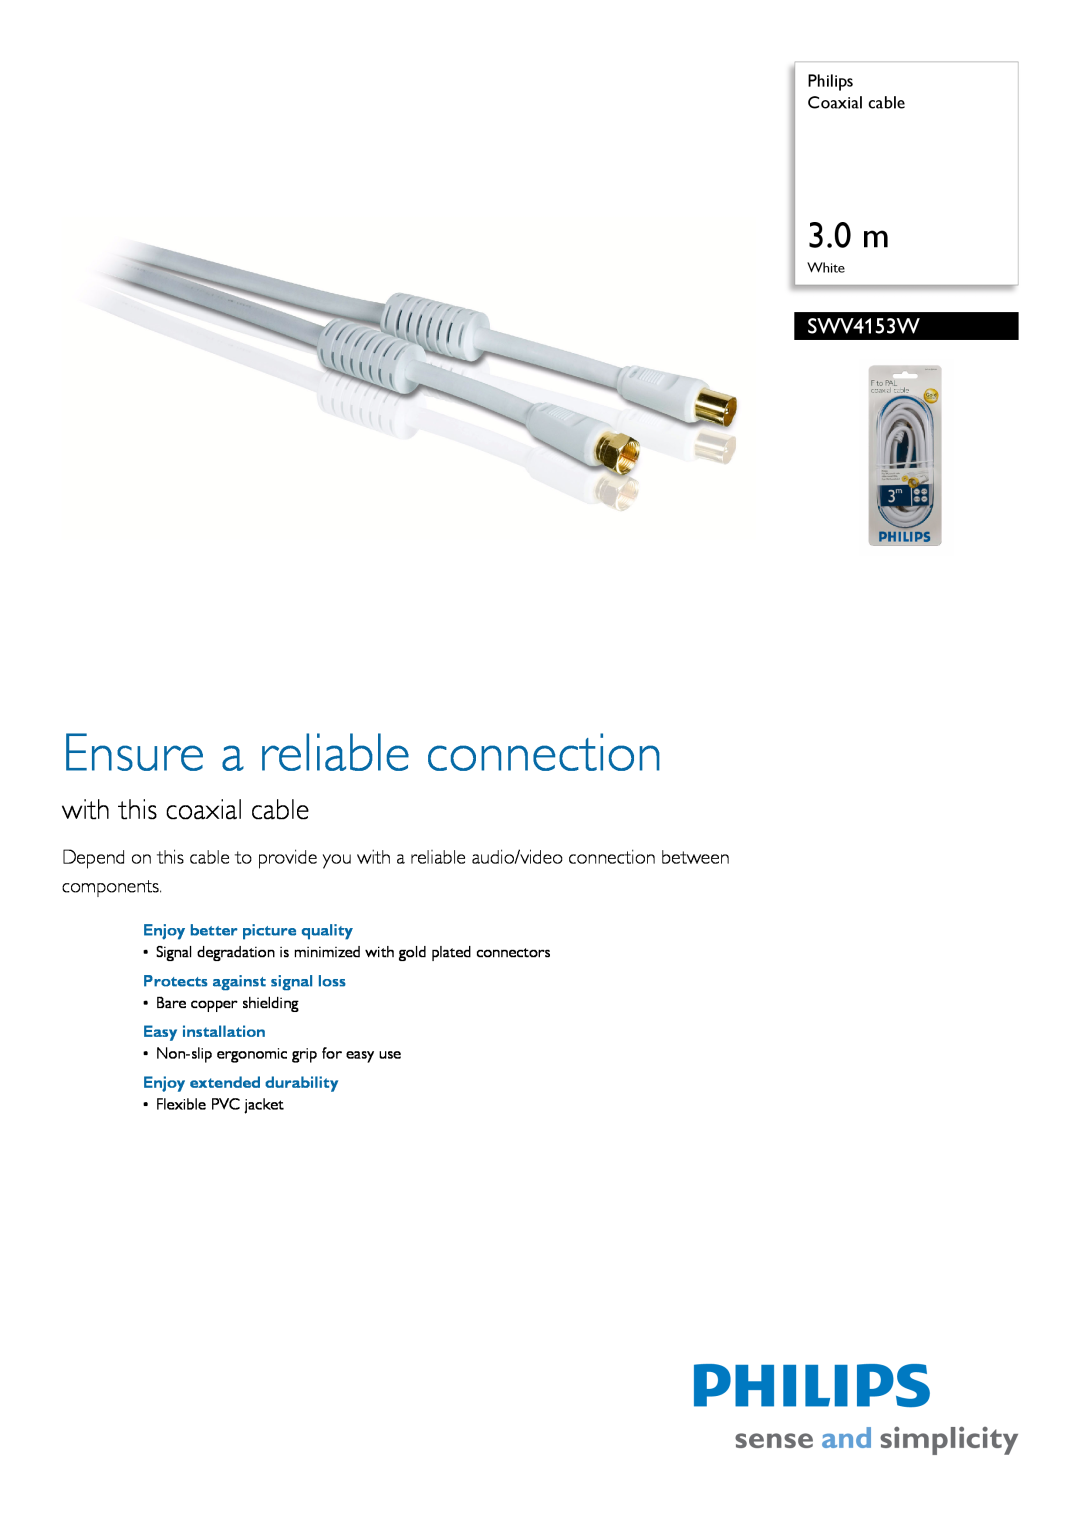 Philips SWV4153W manual Philips Coaxial cable, Enjoy better picture quality, Protects against signal loss, 3.0 m 